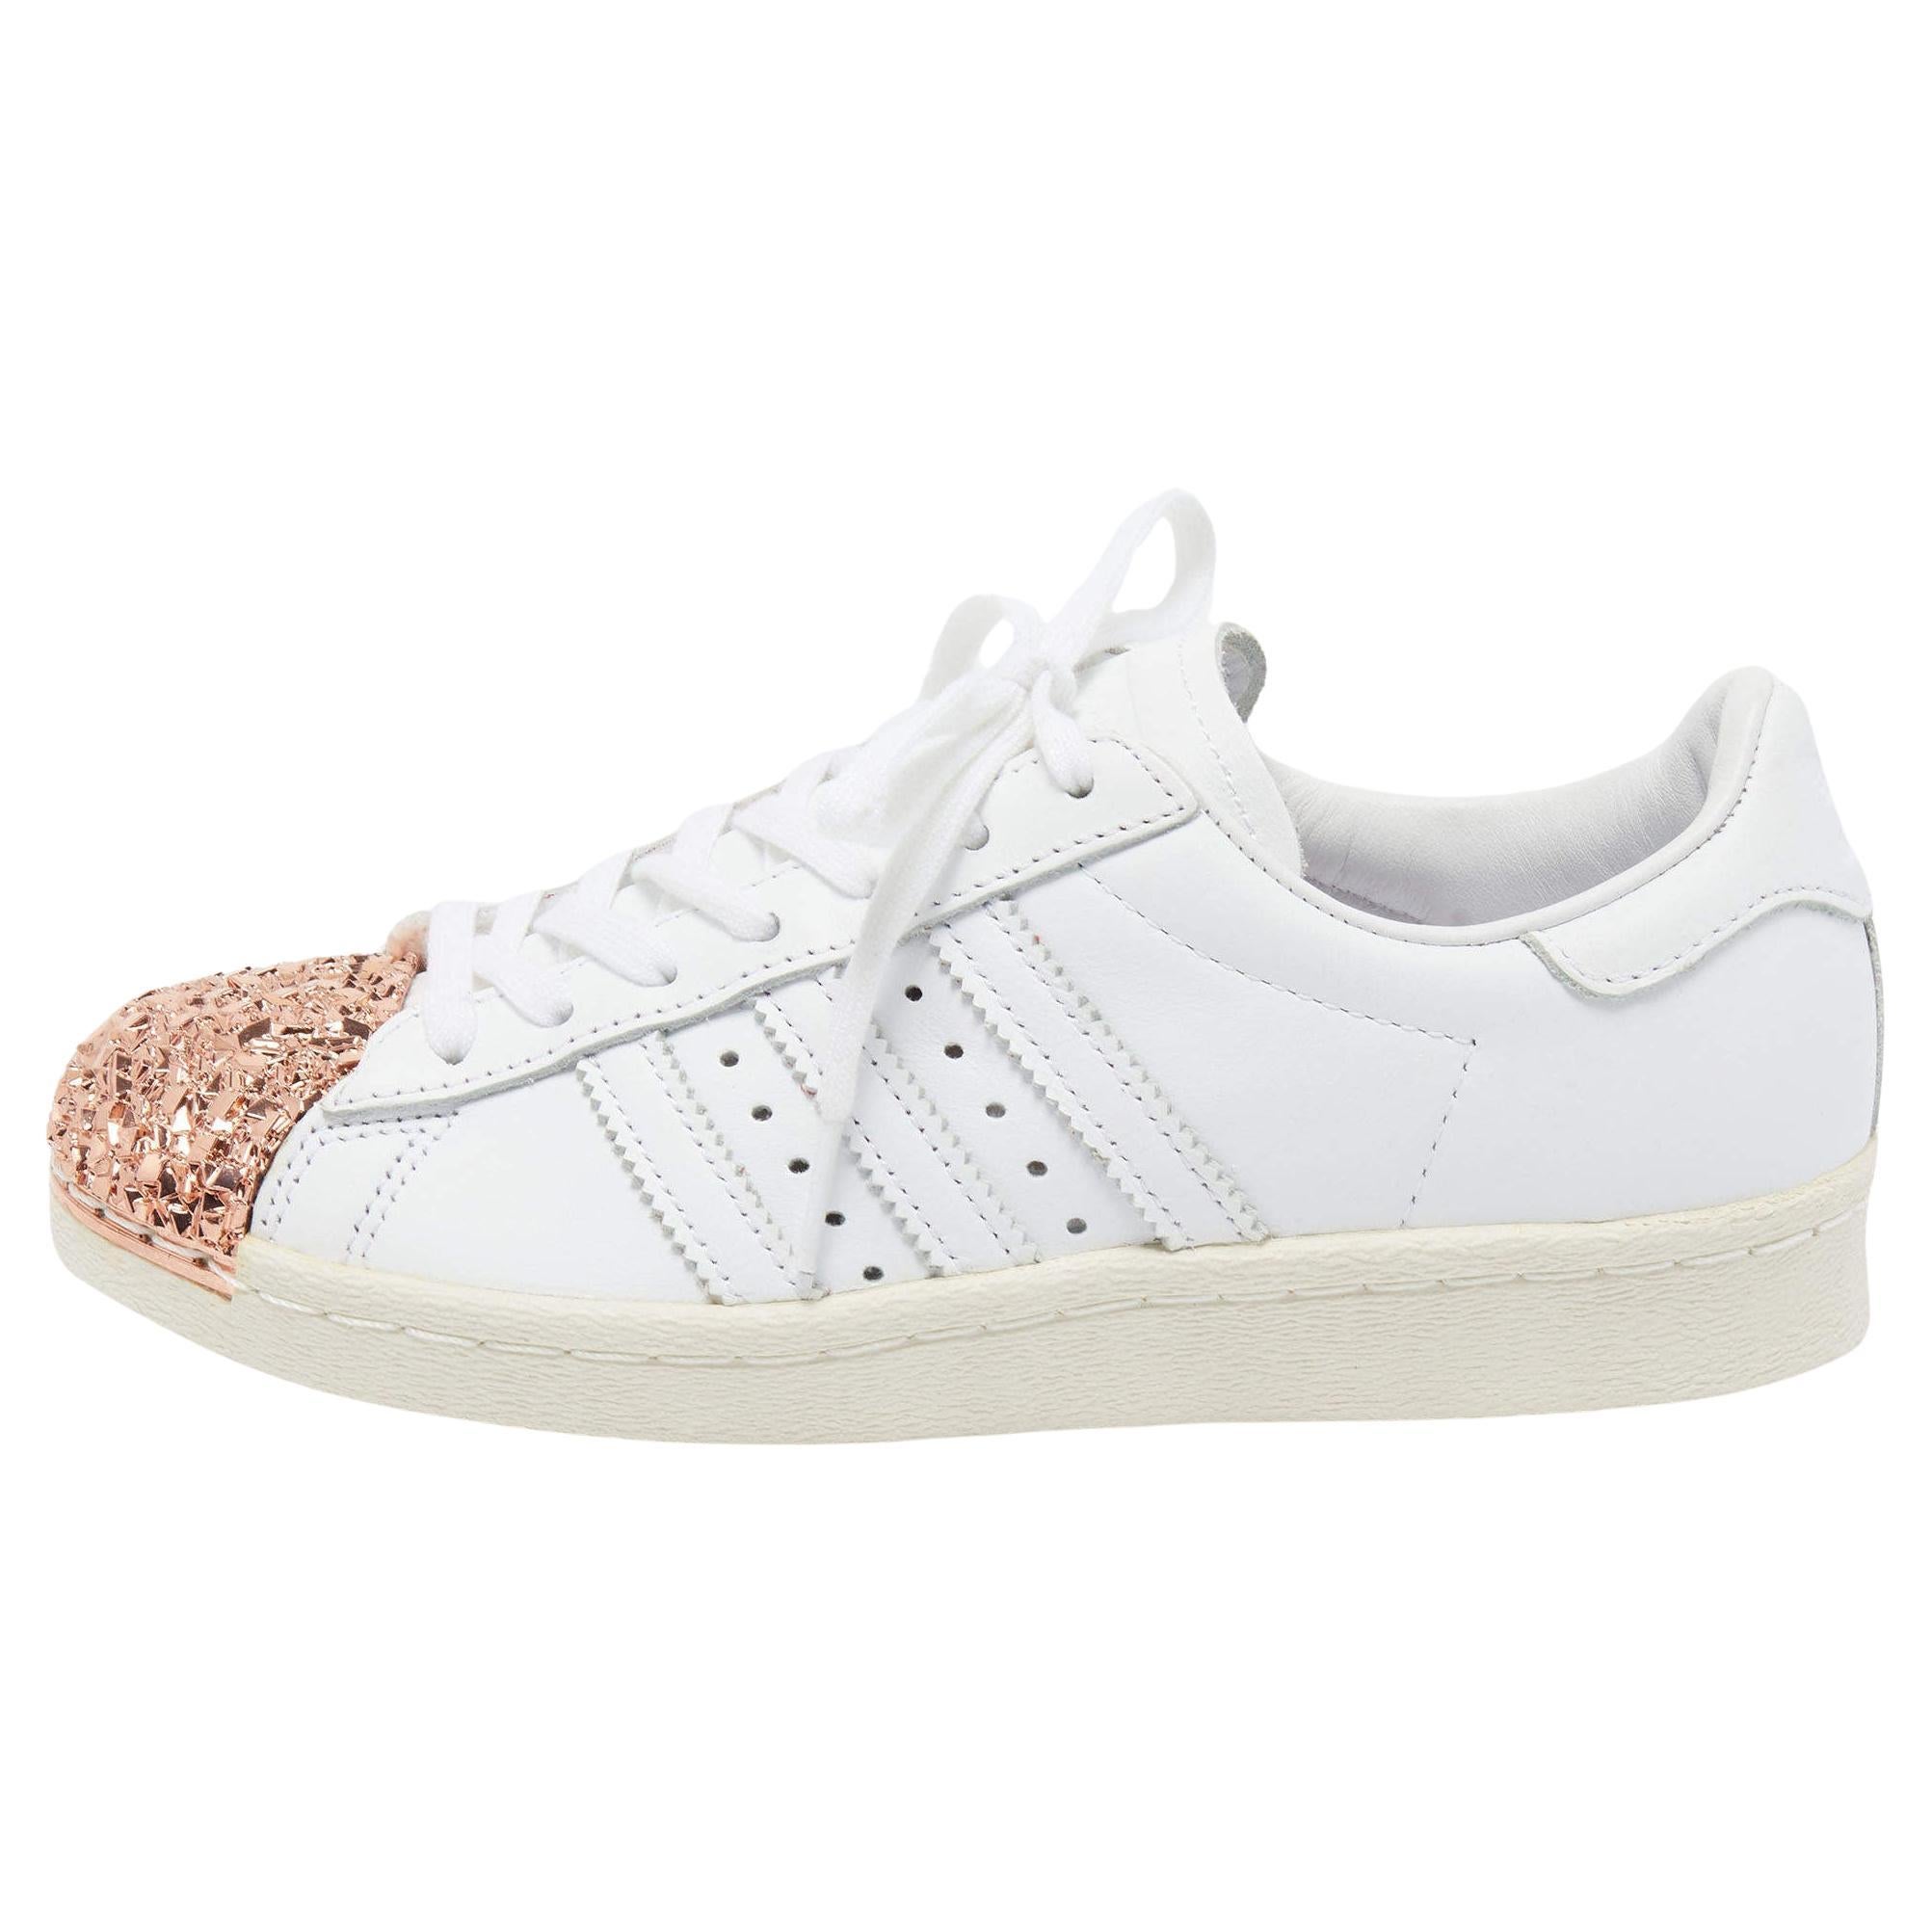 Adidas White/Pink Leather and Metal Superstar Sneakers Size 37.5